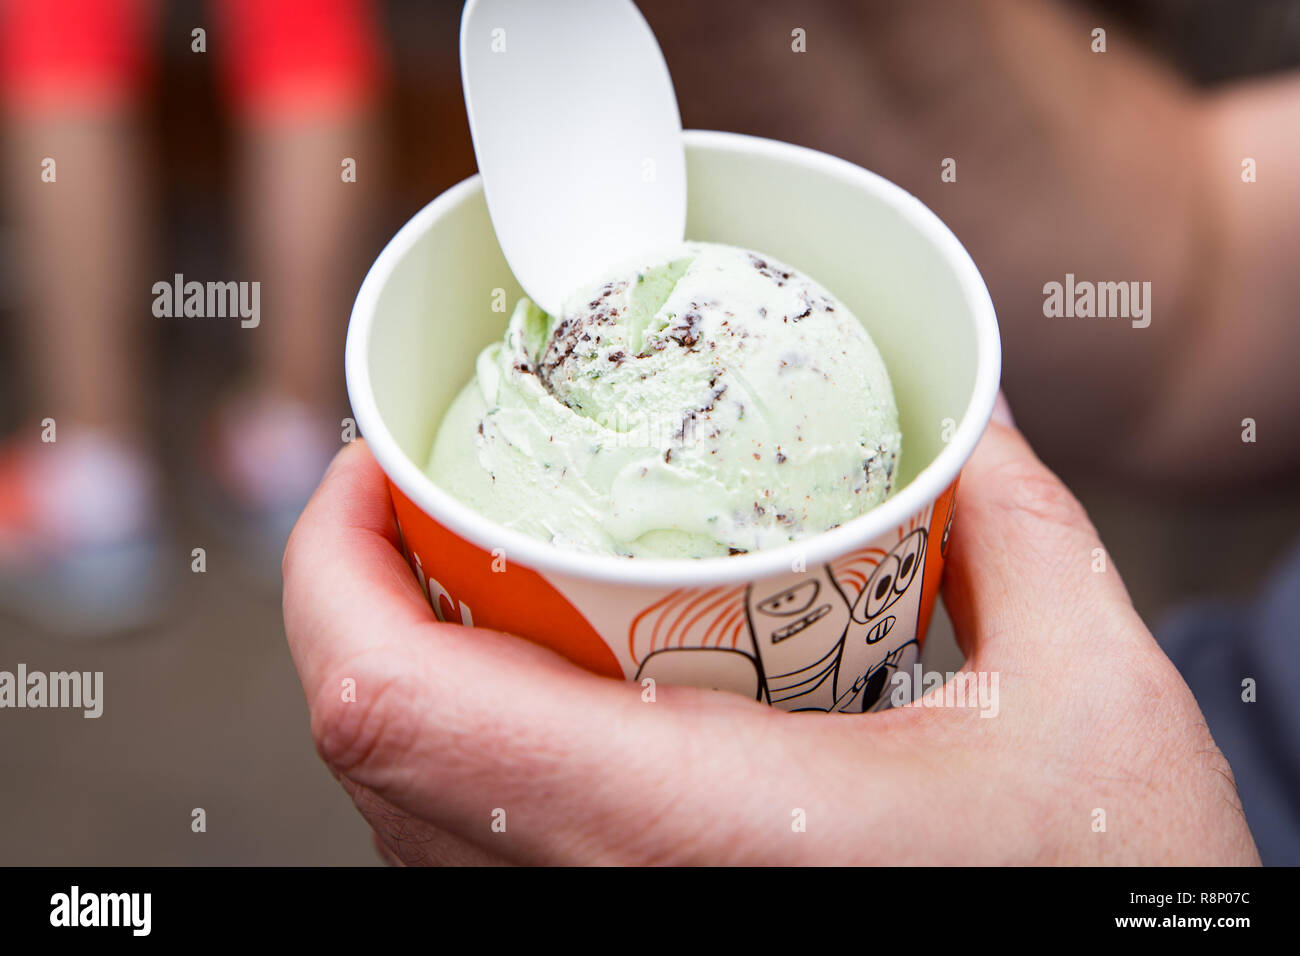 Enjoying a serving of mint and chocolate chip gelato served in a tub with a plastic spoon Stock Photo